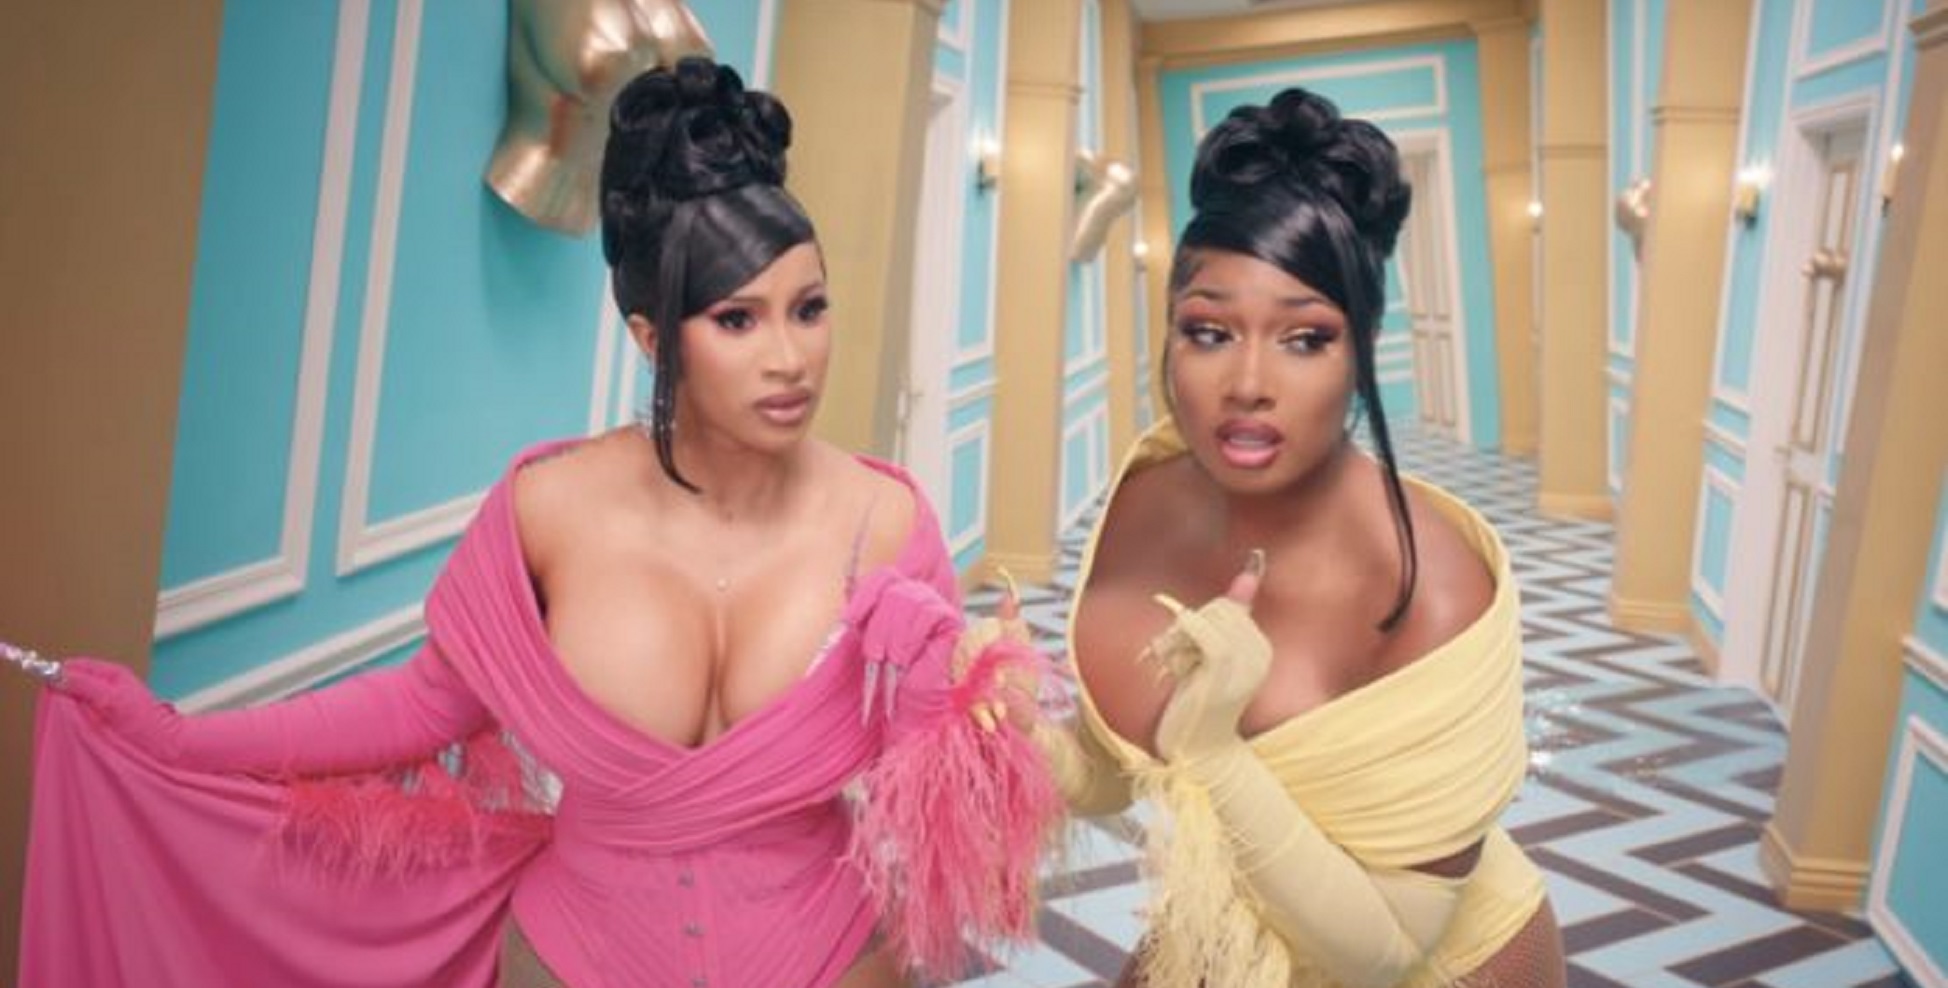 It’s Here! Watch The Music Video For Cardi B and Megan Thee Stallion’s New Bop – ‘WAP’